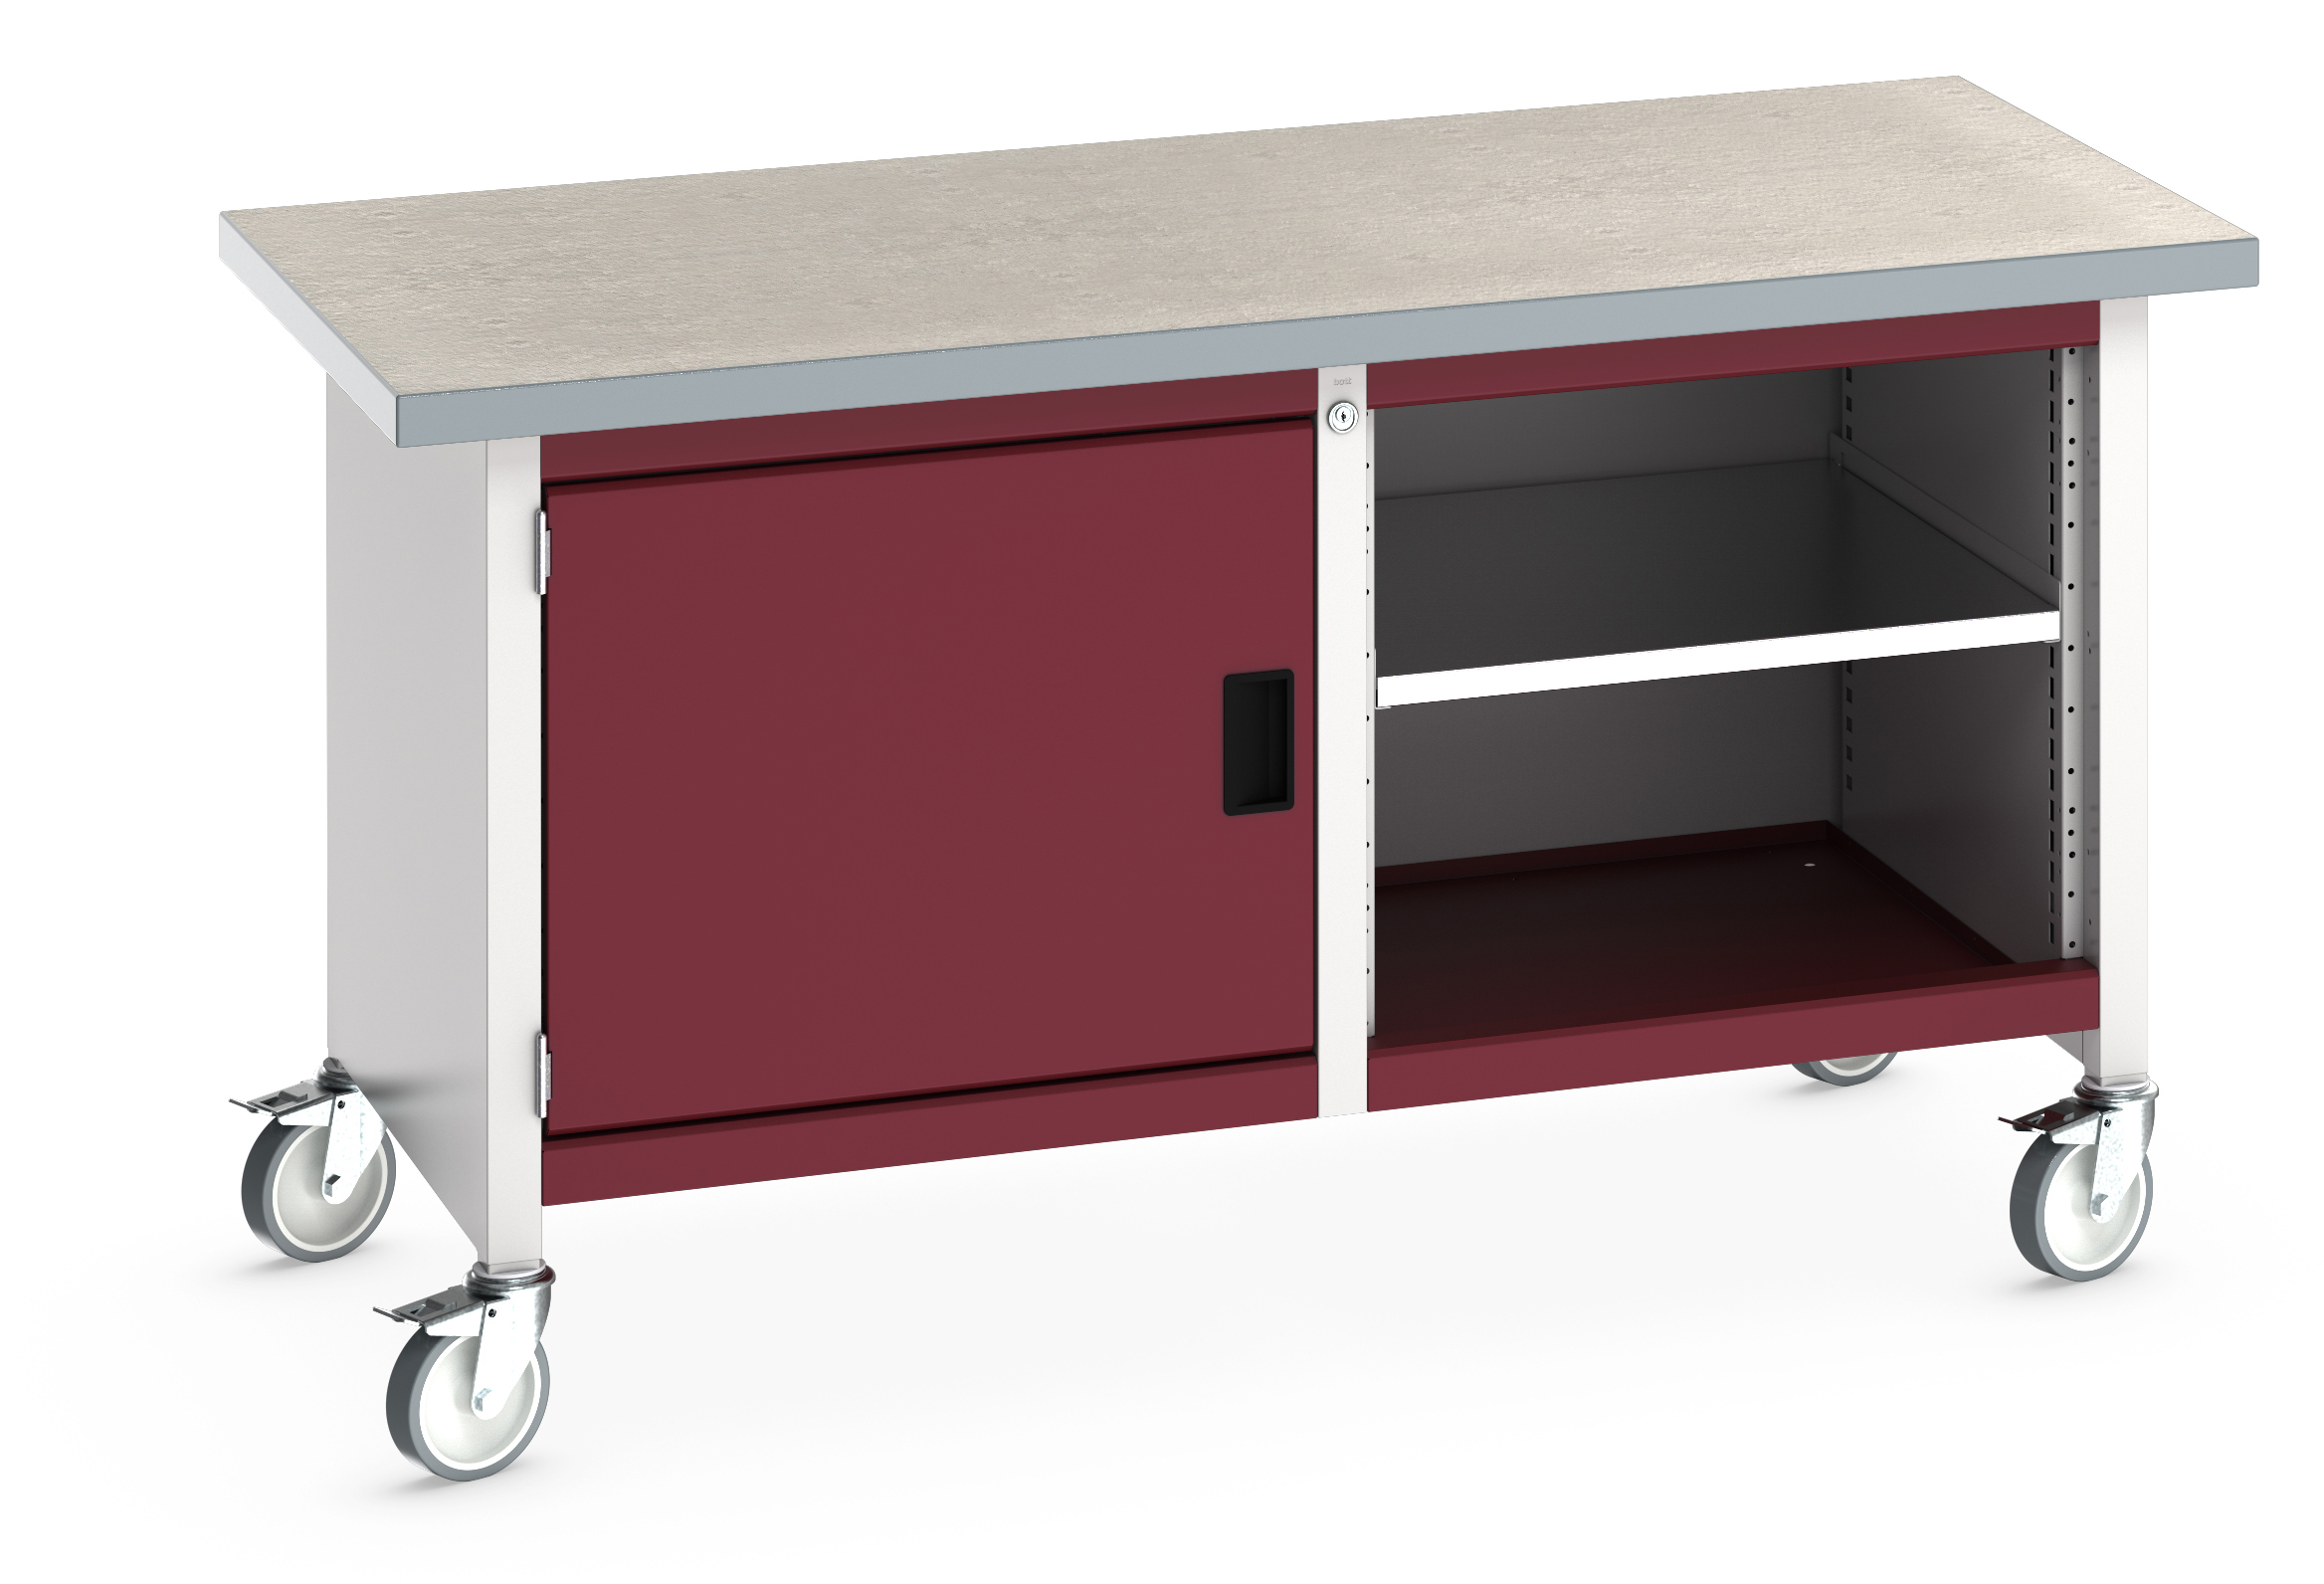 Bott Cubio Mobile Storage Bench With Full Cupboard / Open Cupboard - 41002096.24V